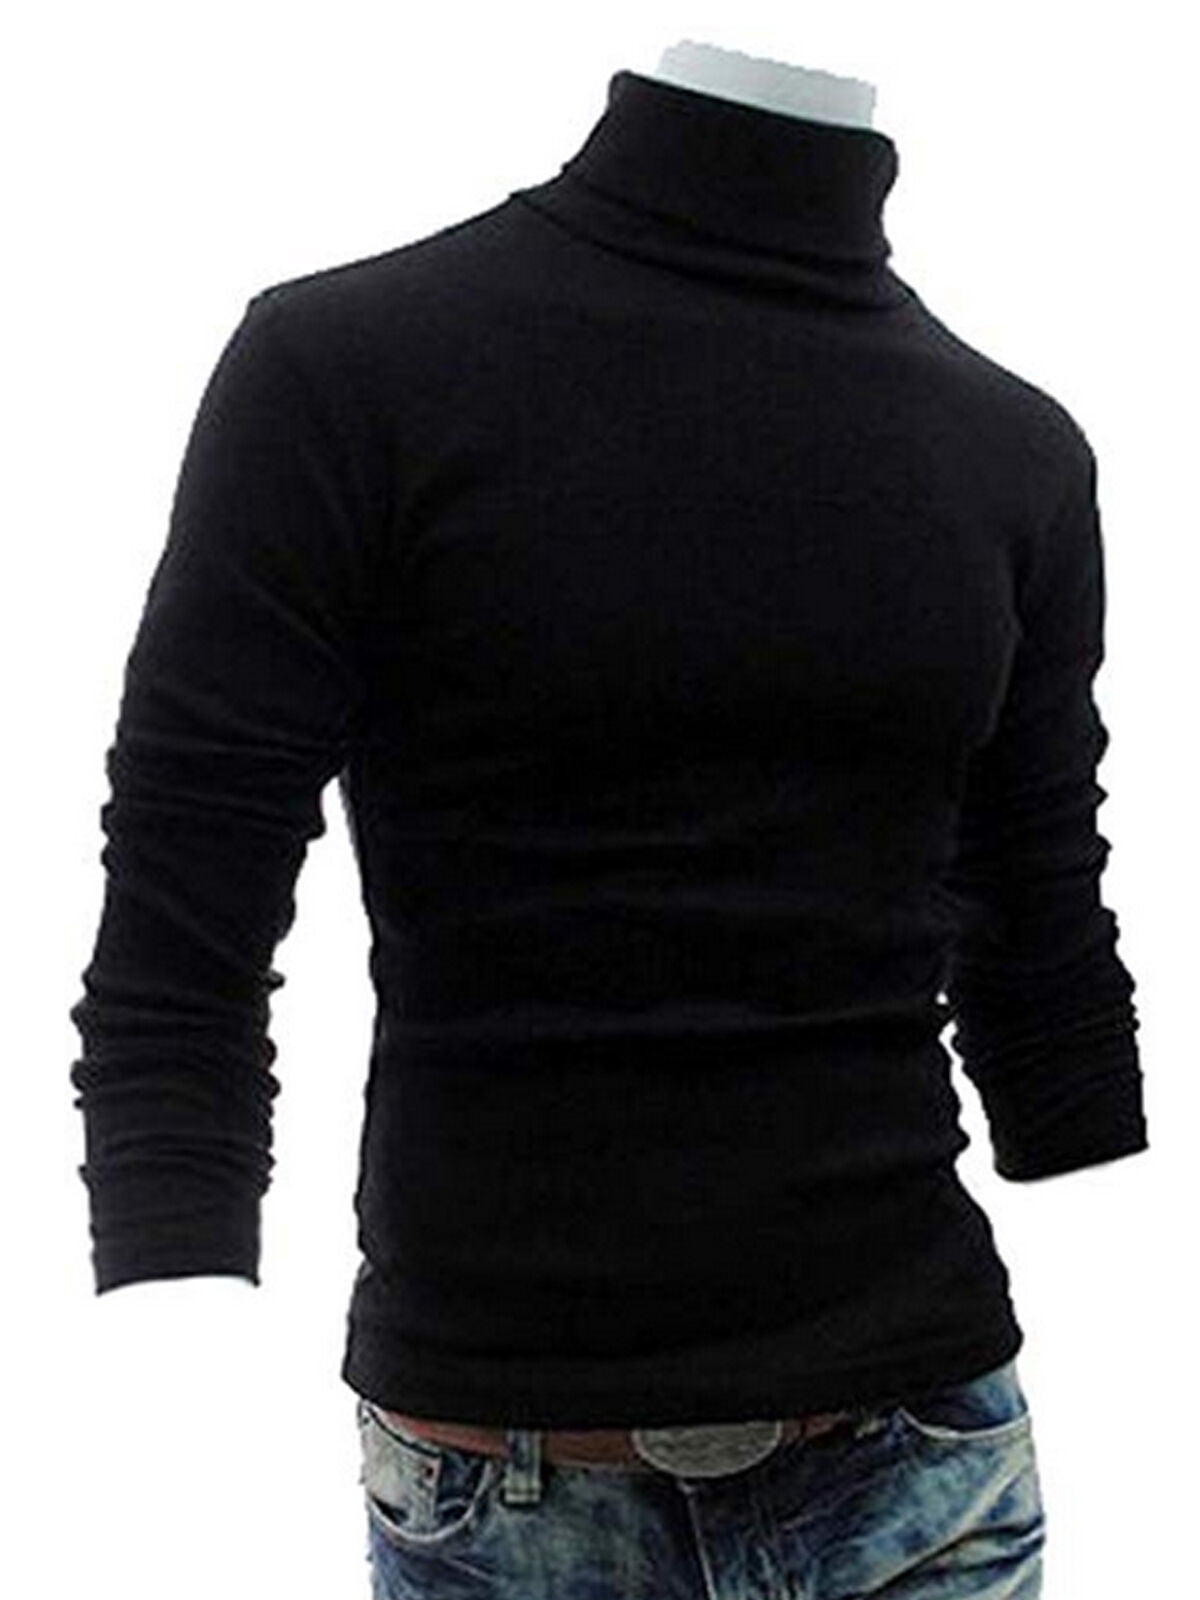 YUNY Mens Knitwear Solid Turtleneck Pullover Top Tee Sweater 1 L 